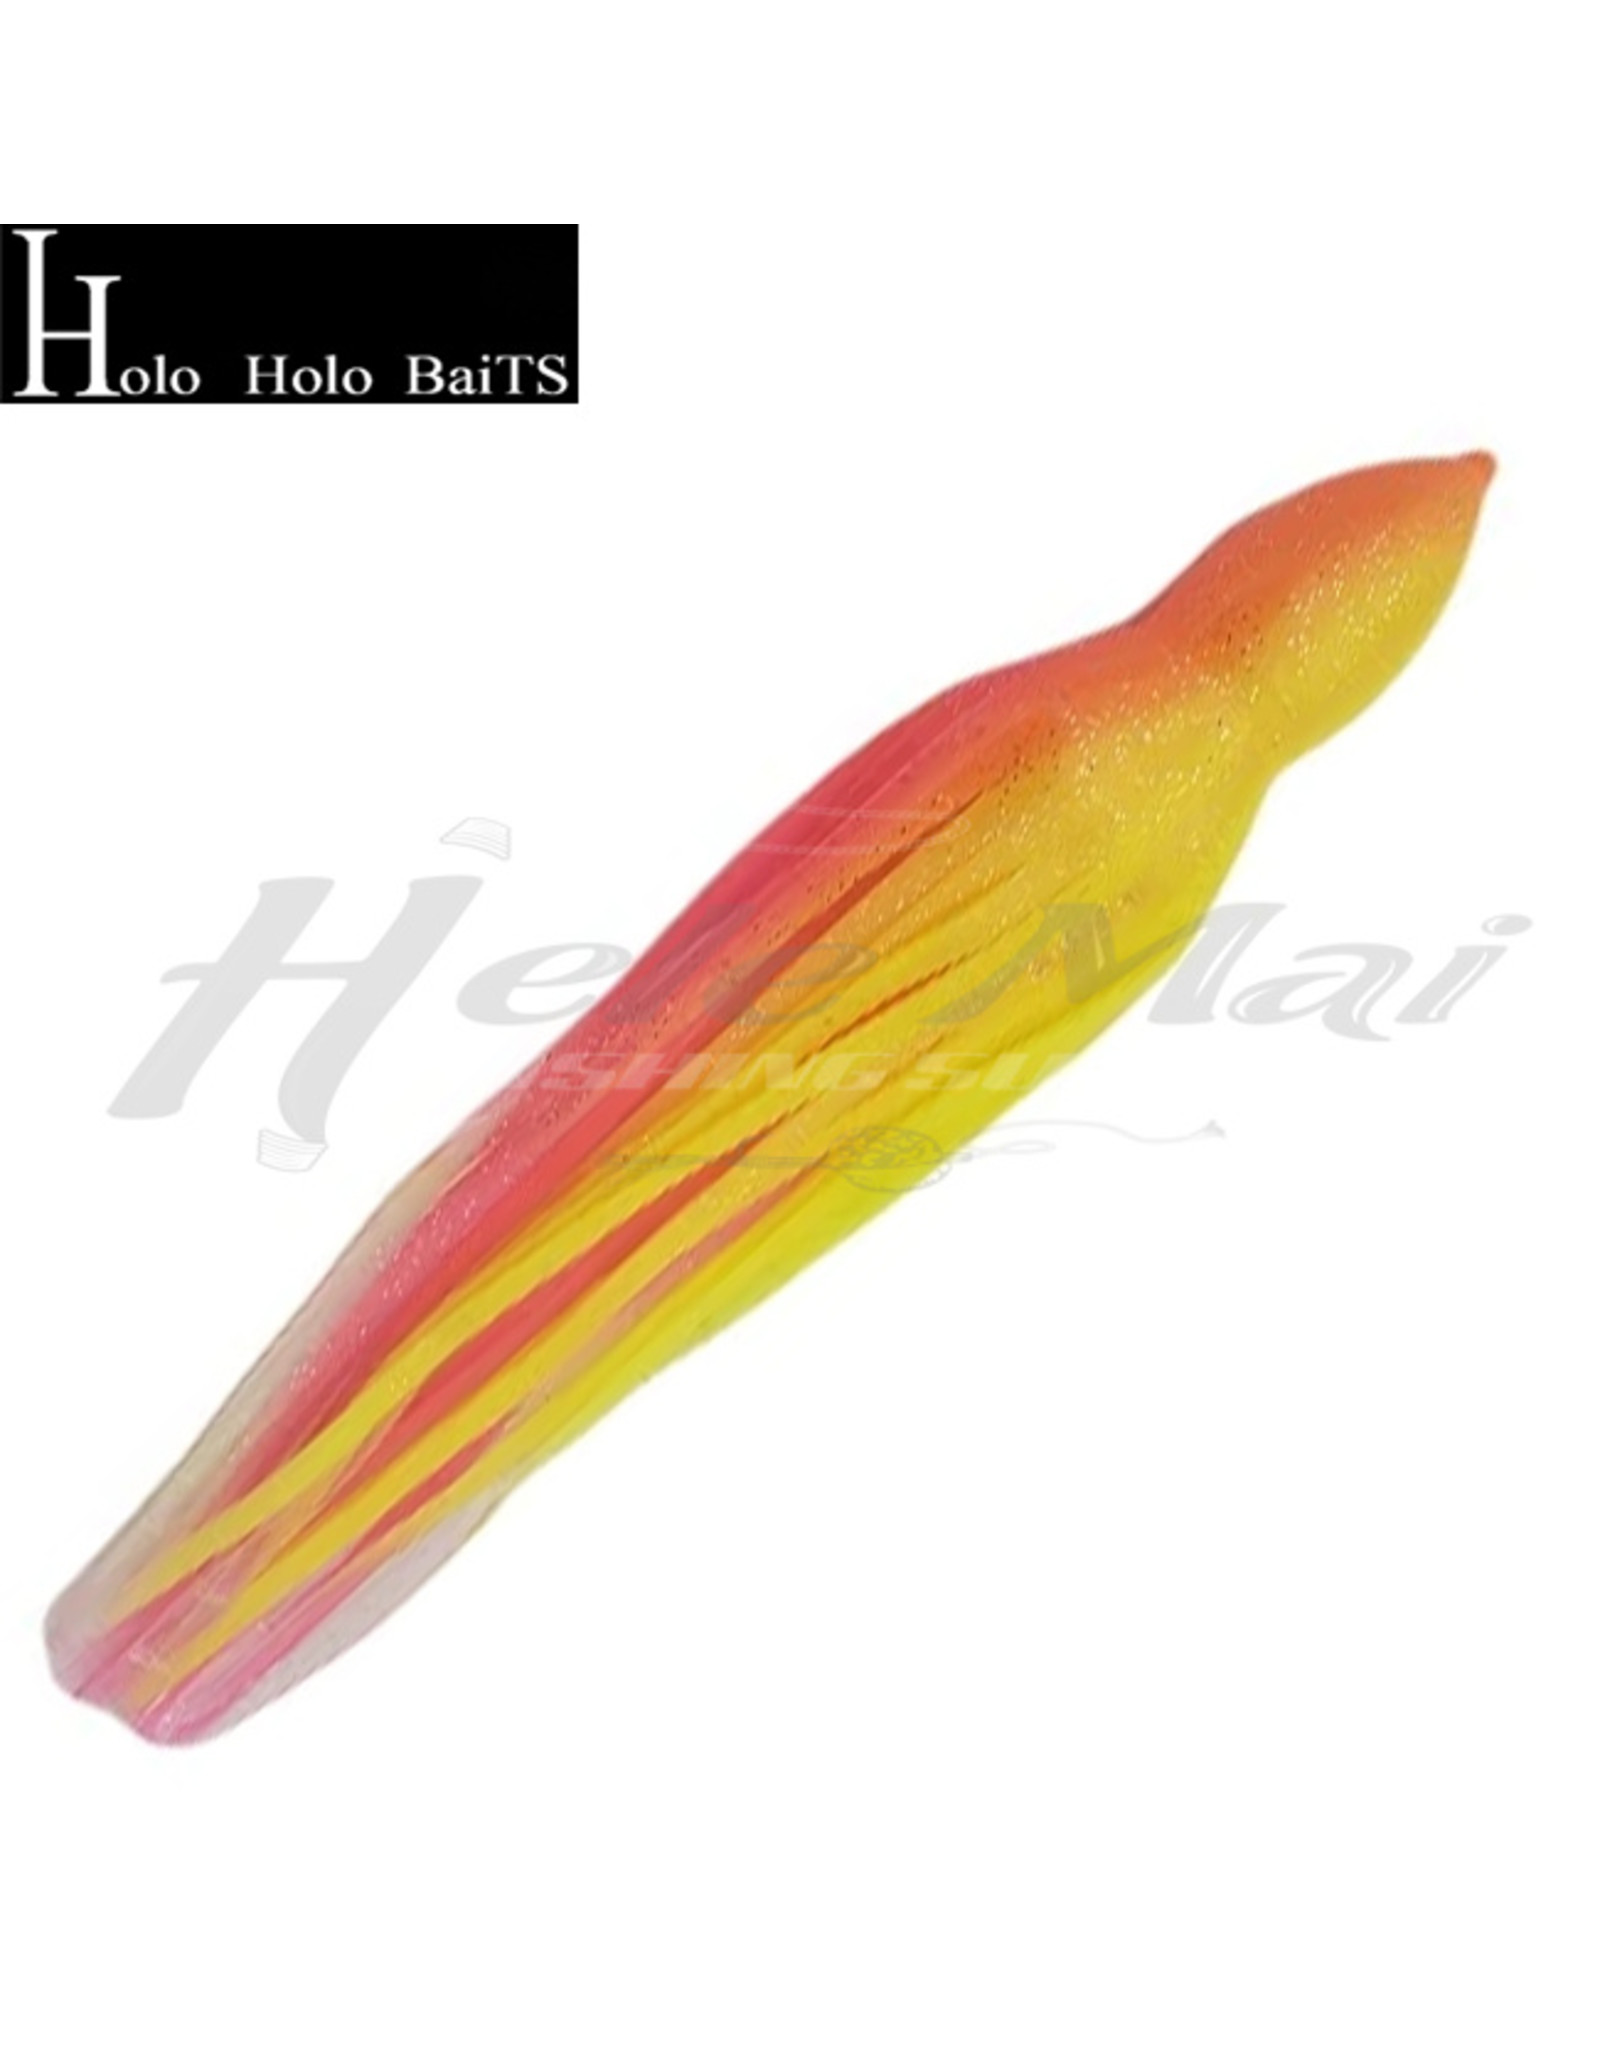 HOLO HOLO HH, 7" SQUID SKIRT SUNRISE PINK YELLOW 1105